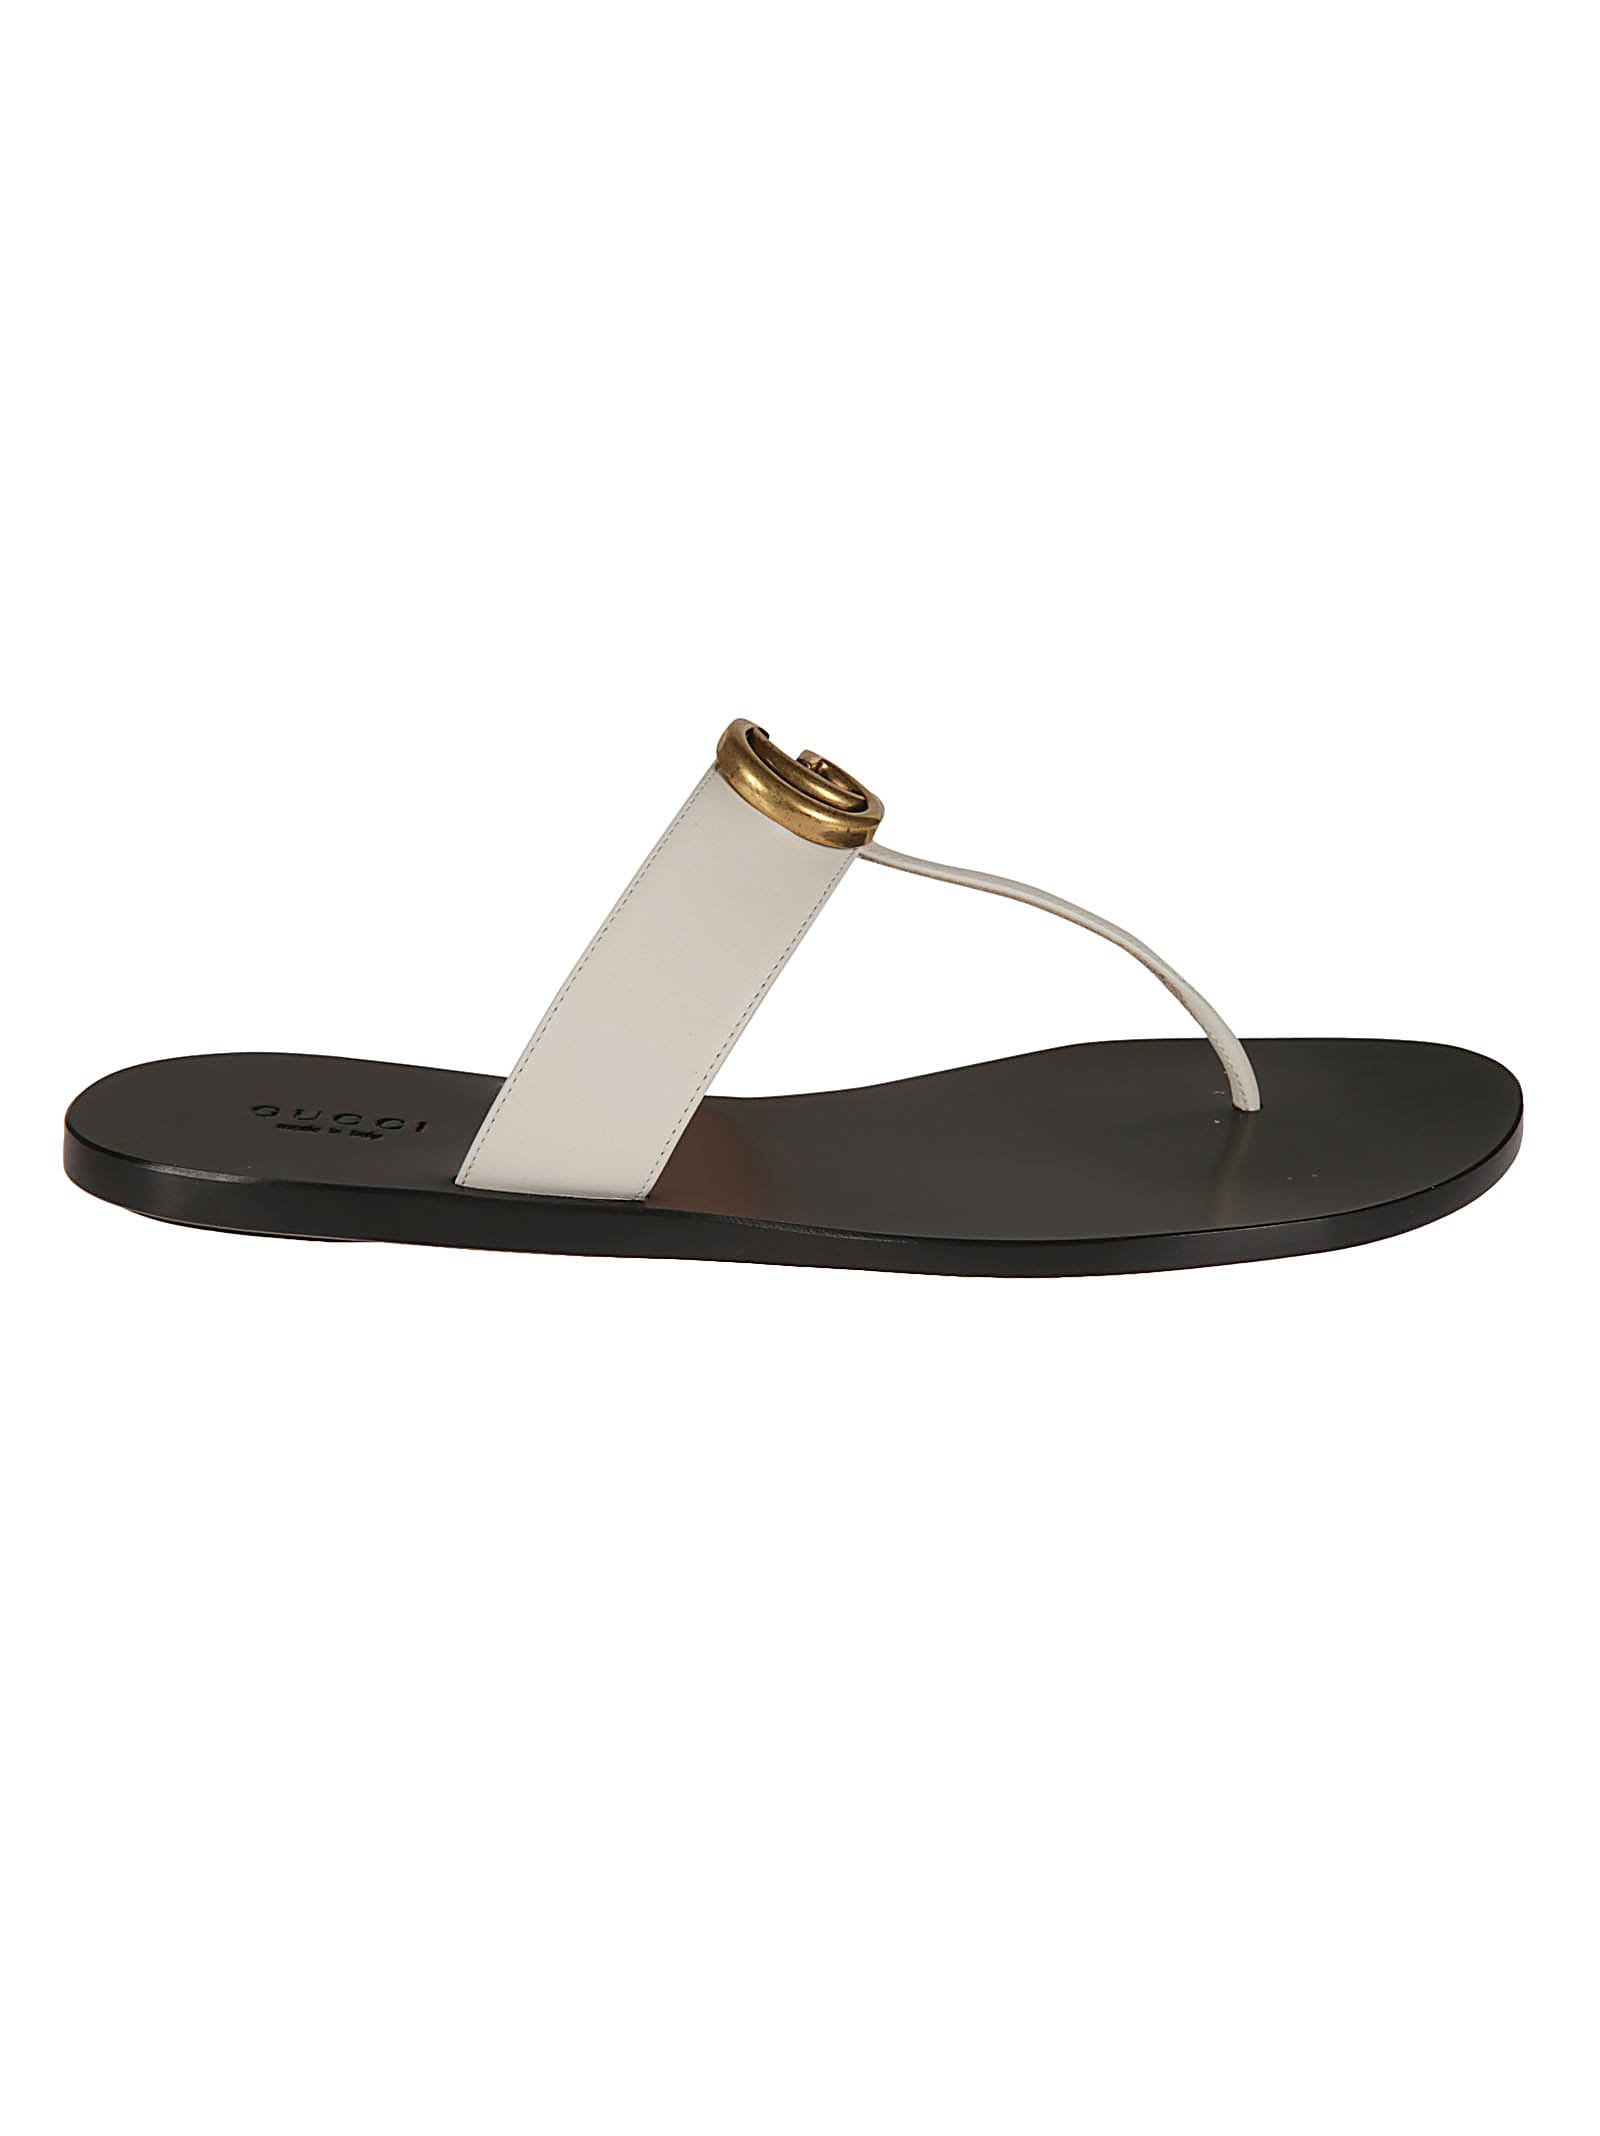 Buy Gucci Lifford Sandals online, shop Gucci shoes with free shipping